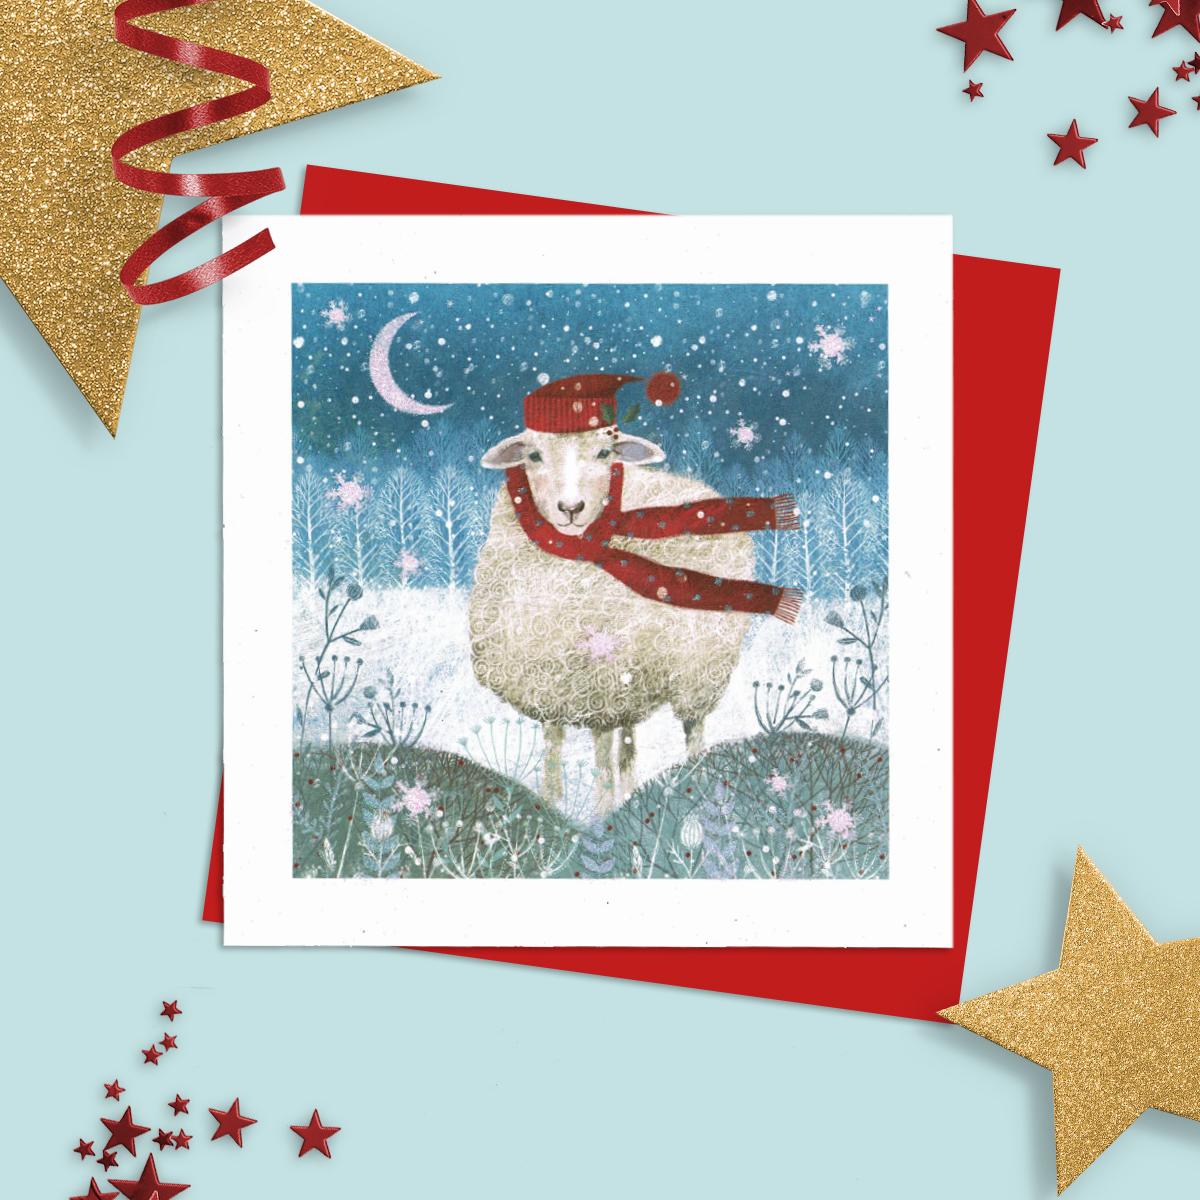 General Christmas Card Featuring A Sheep Out In The Snow Wearing Hat And Scarf! Finished With Added Sparkle And Red Envelope